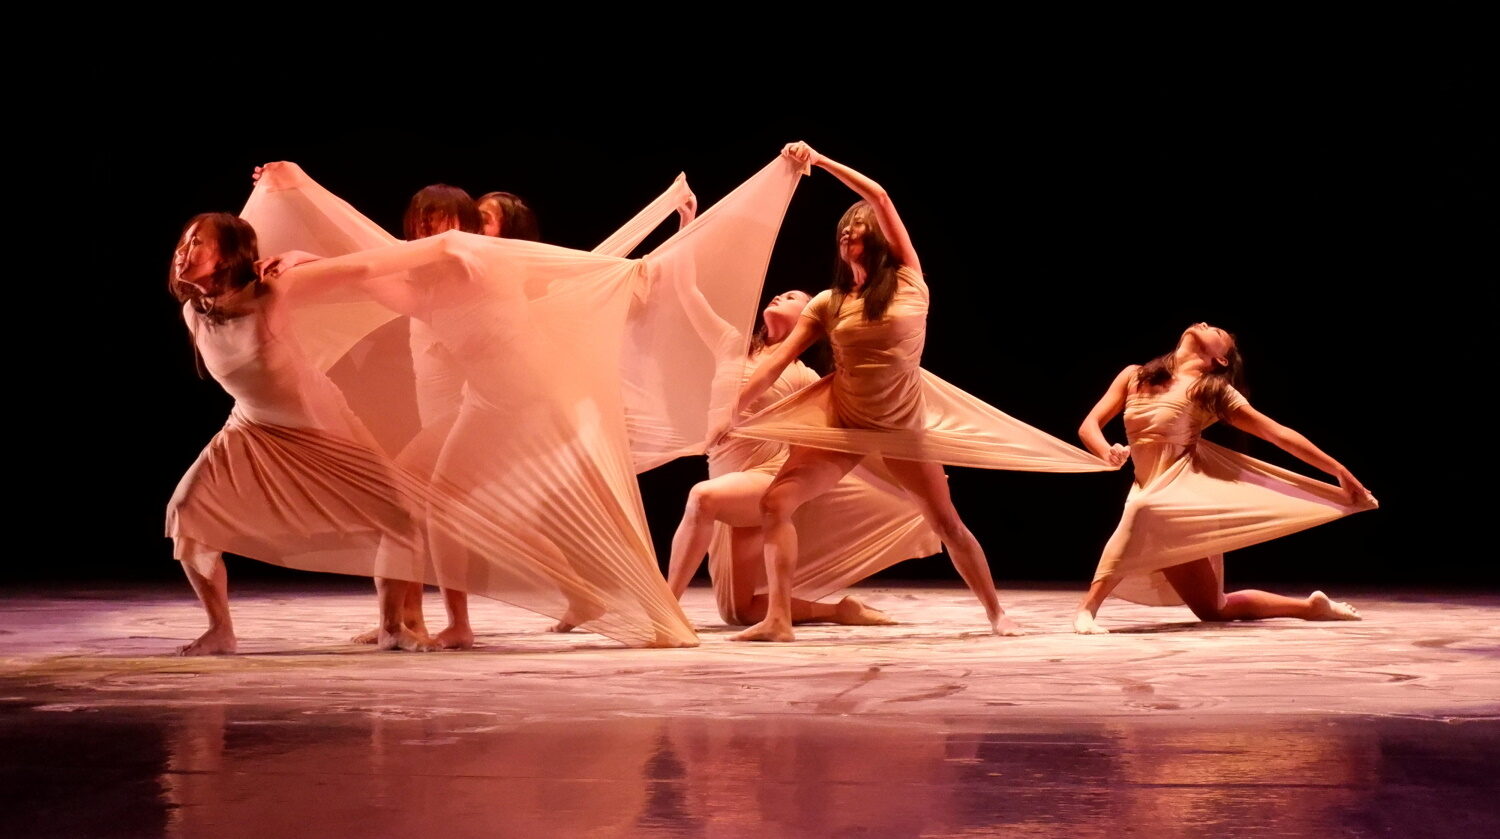 Erl Sorilla's work "Musa", filmed at the Cultural Center of the Philippines. Photo: Lester John Reguindin